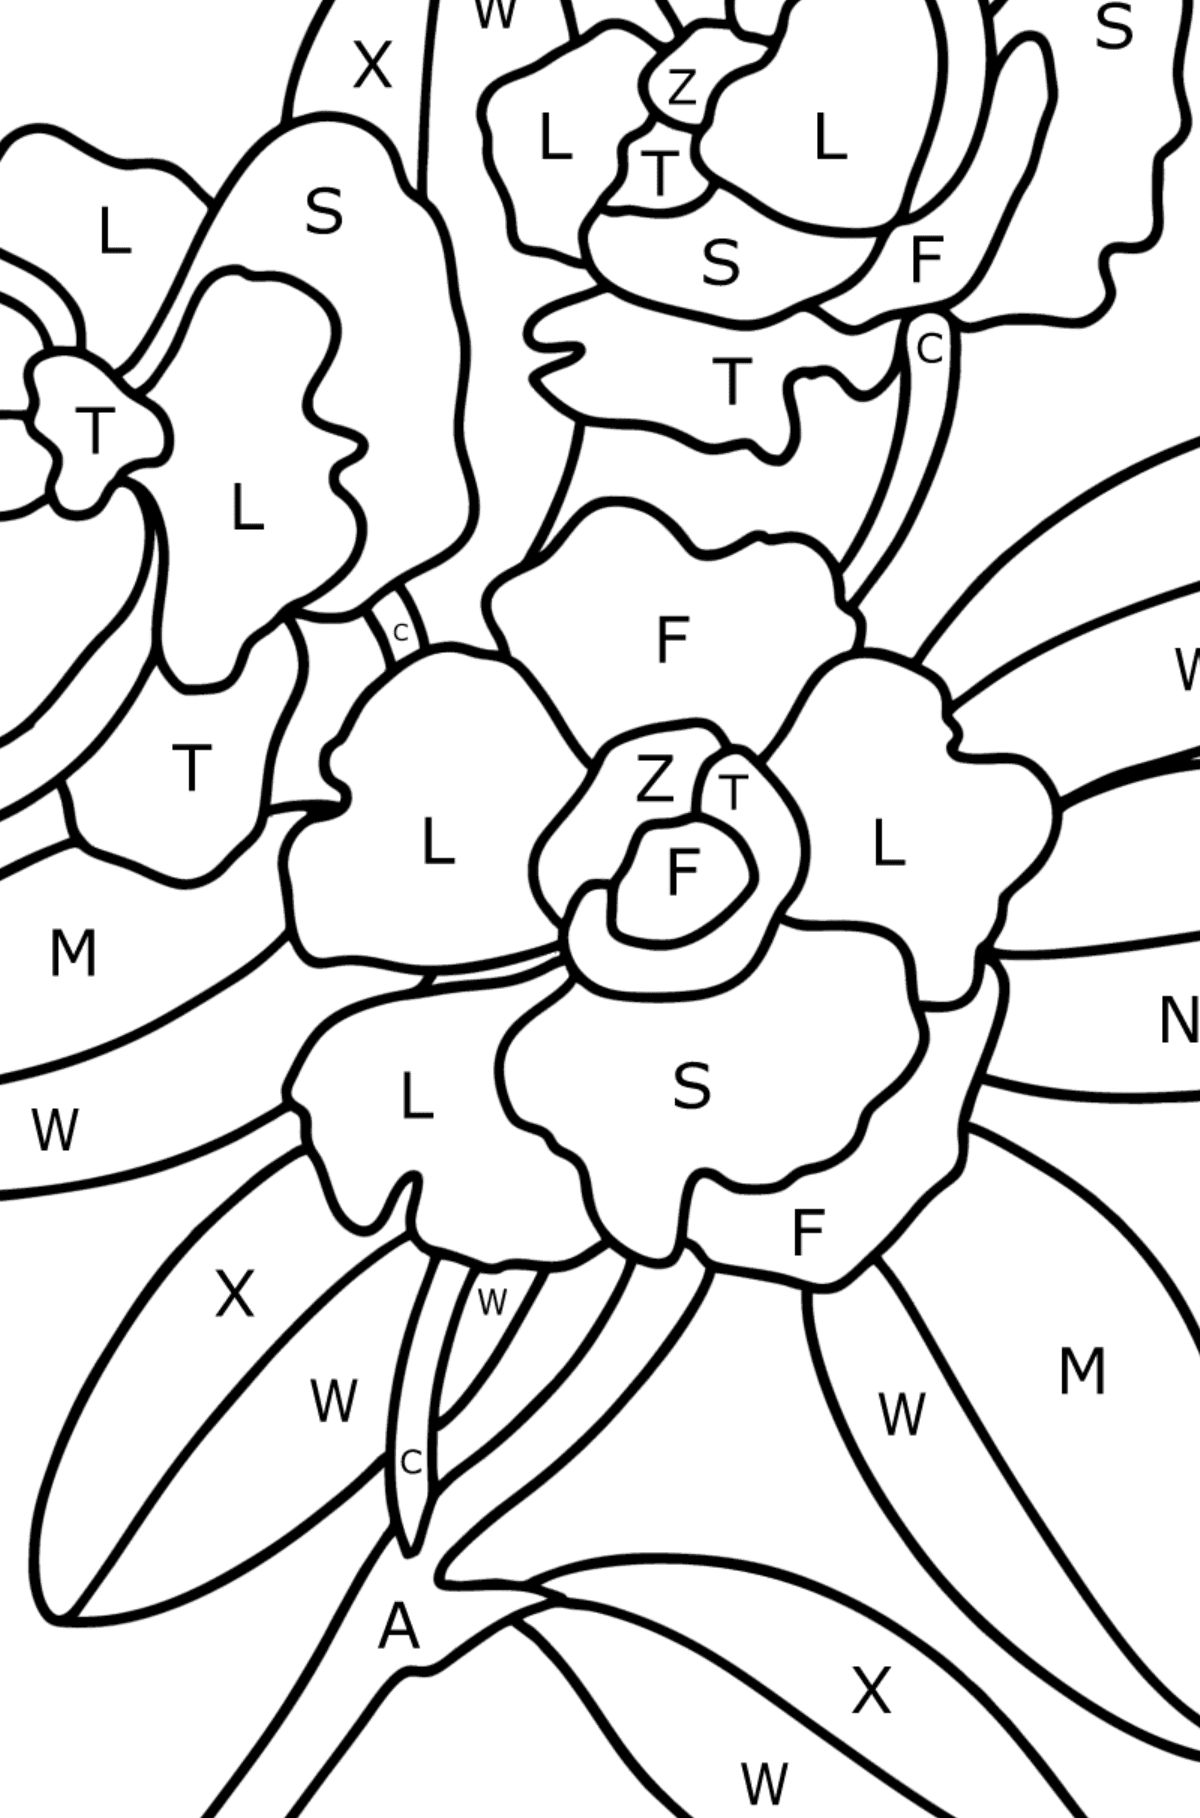 Gardenia coloring page - Coloring by Letters for Kids